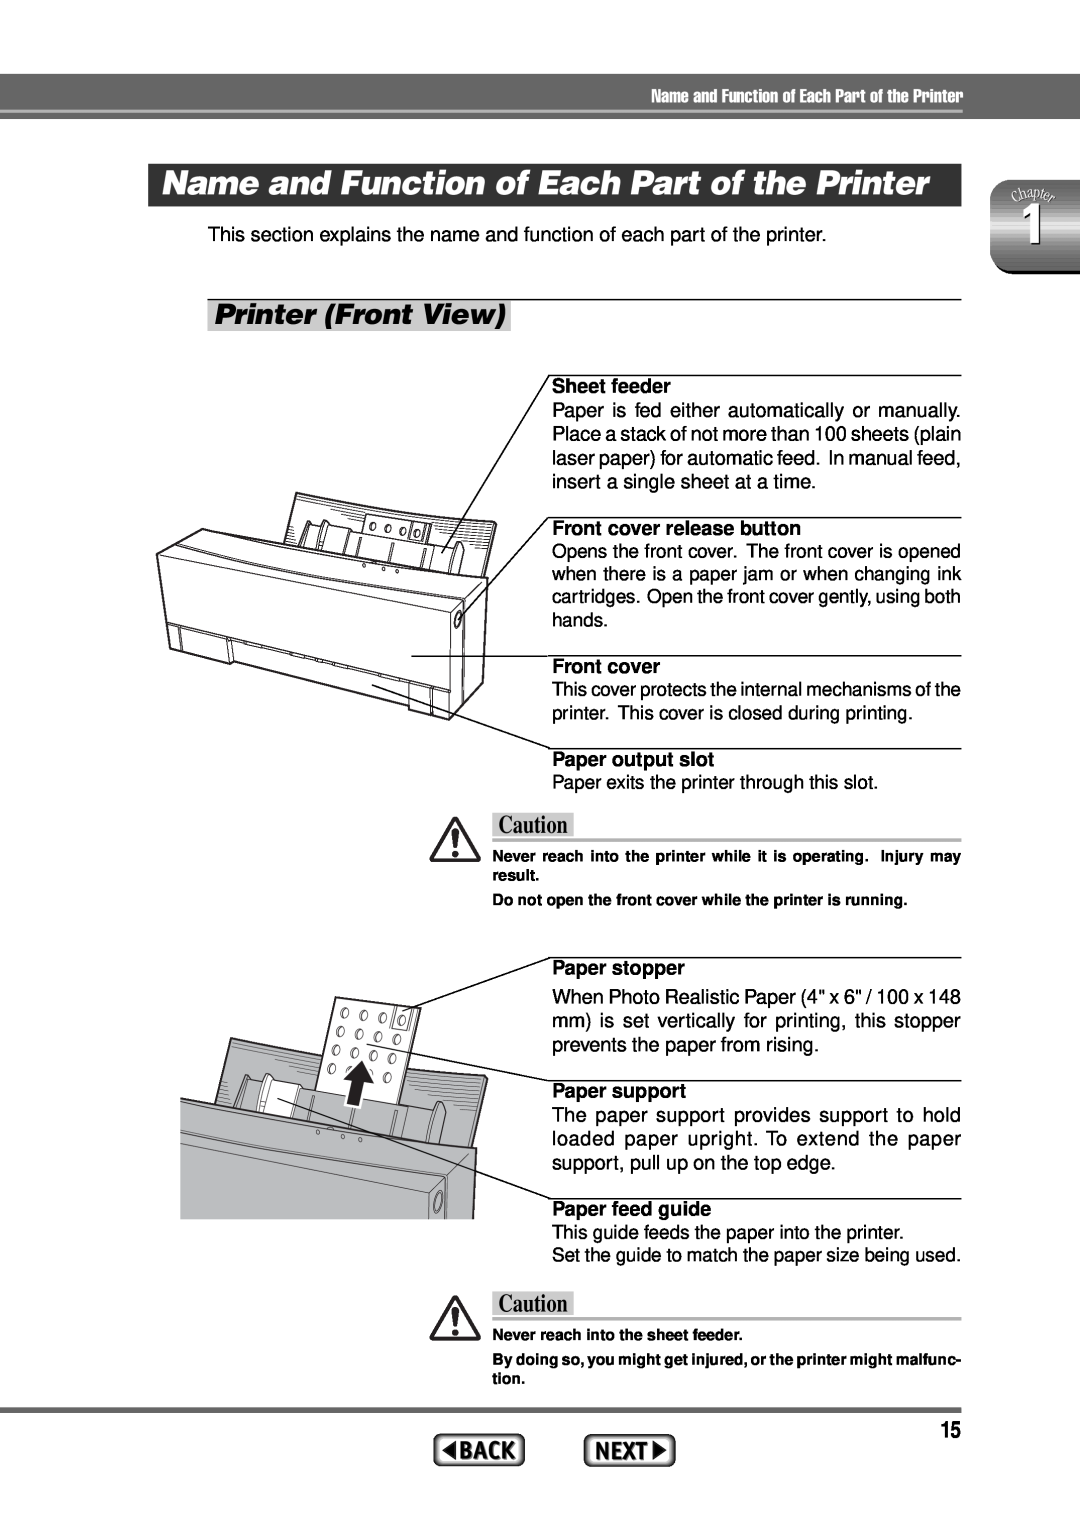 Alps Electric MD-1300 manual Name and Function of Each Part of the Printer, Printer Front View 